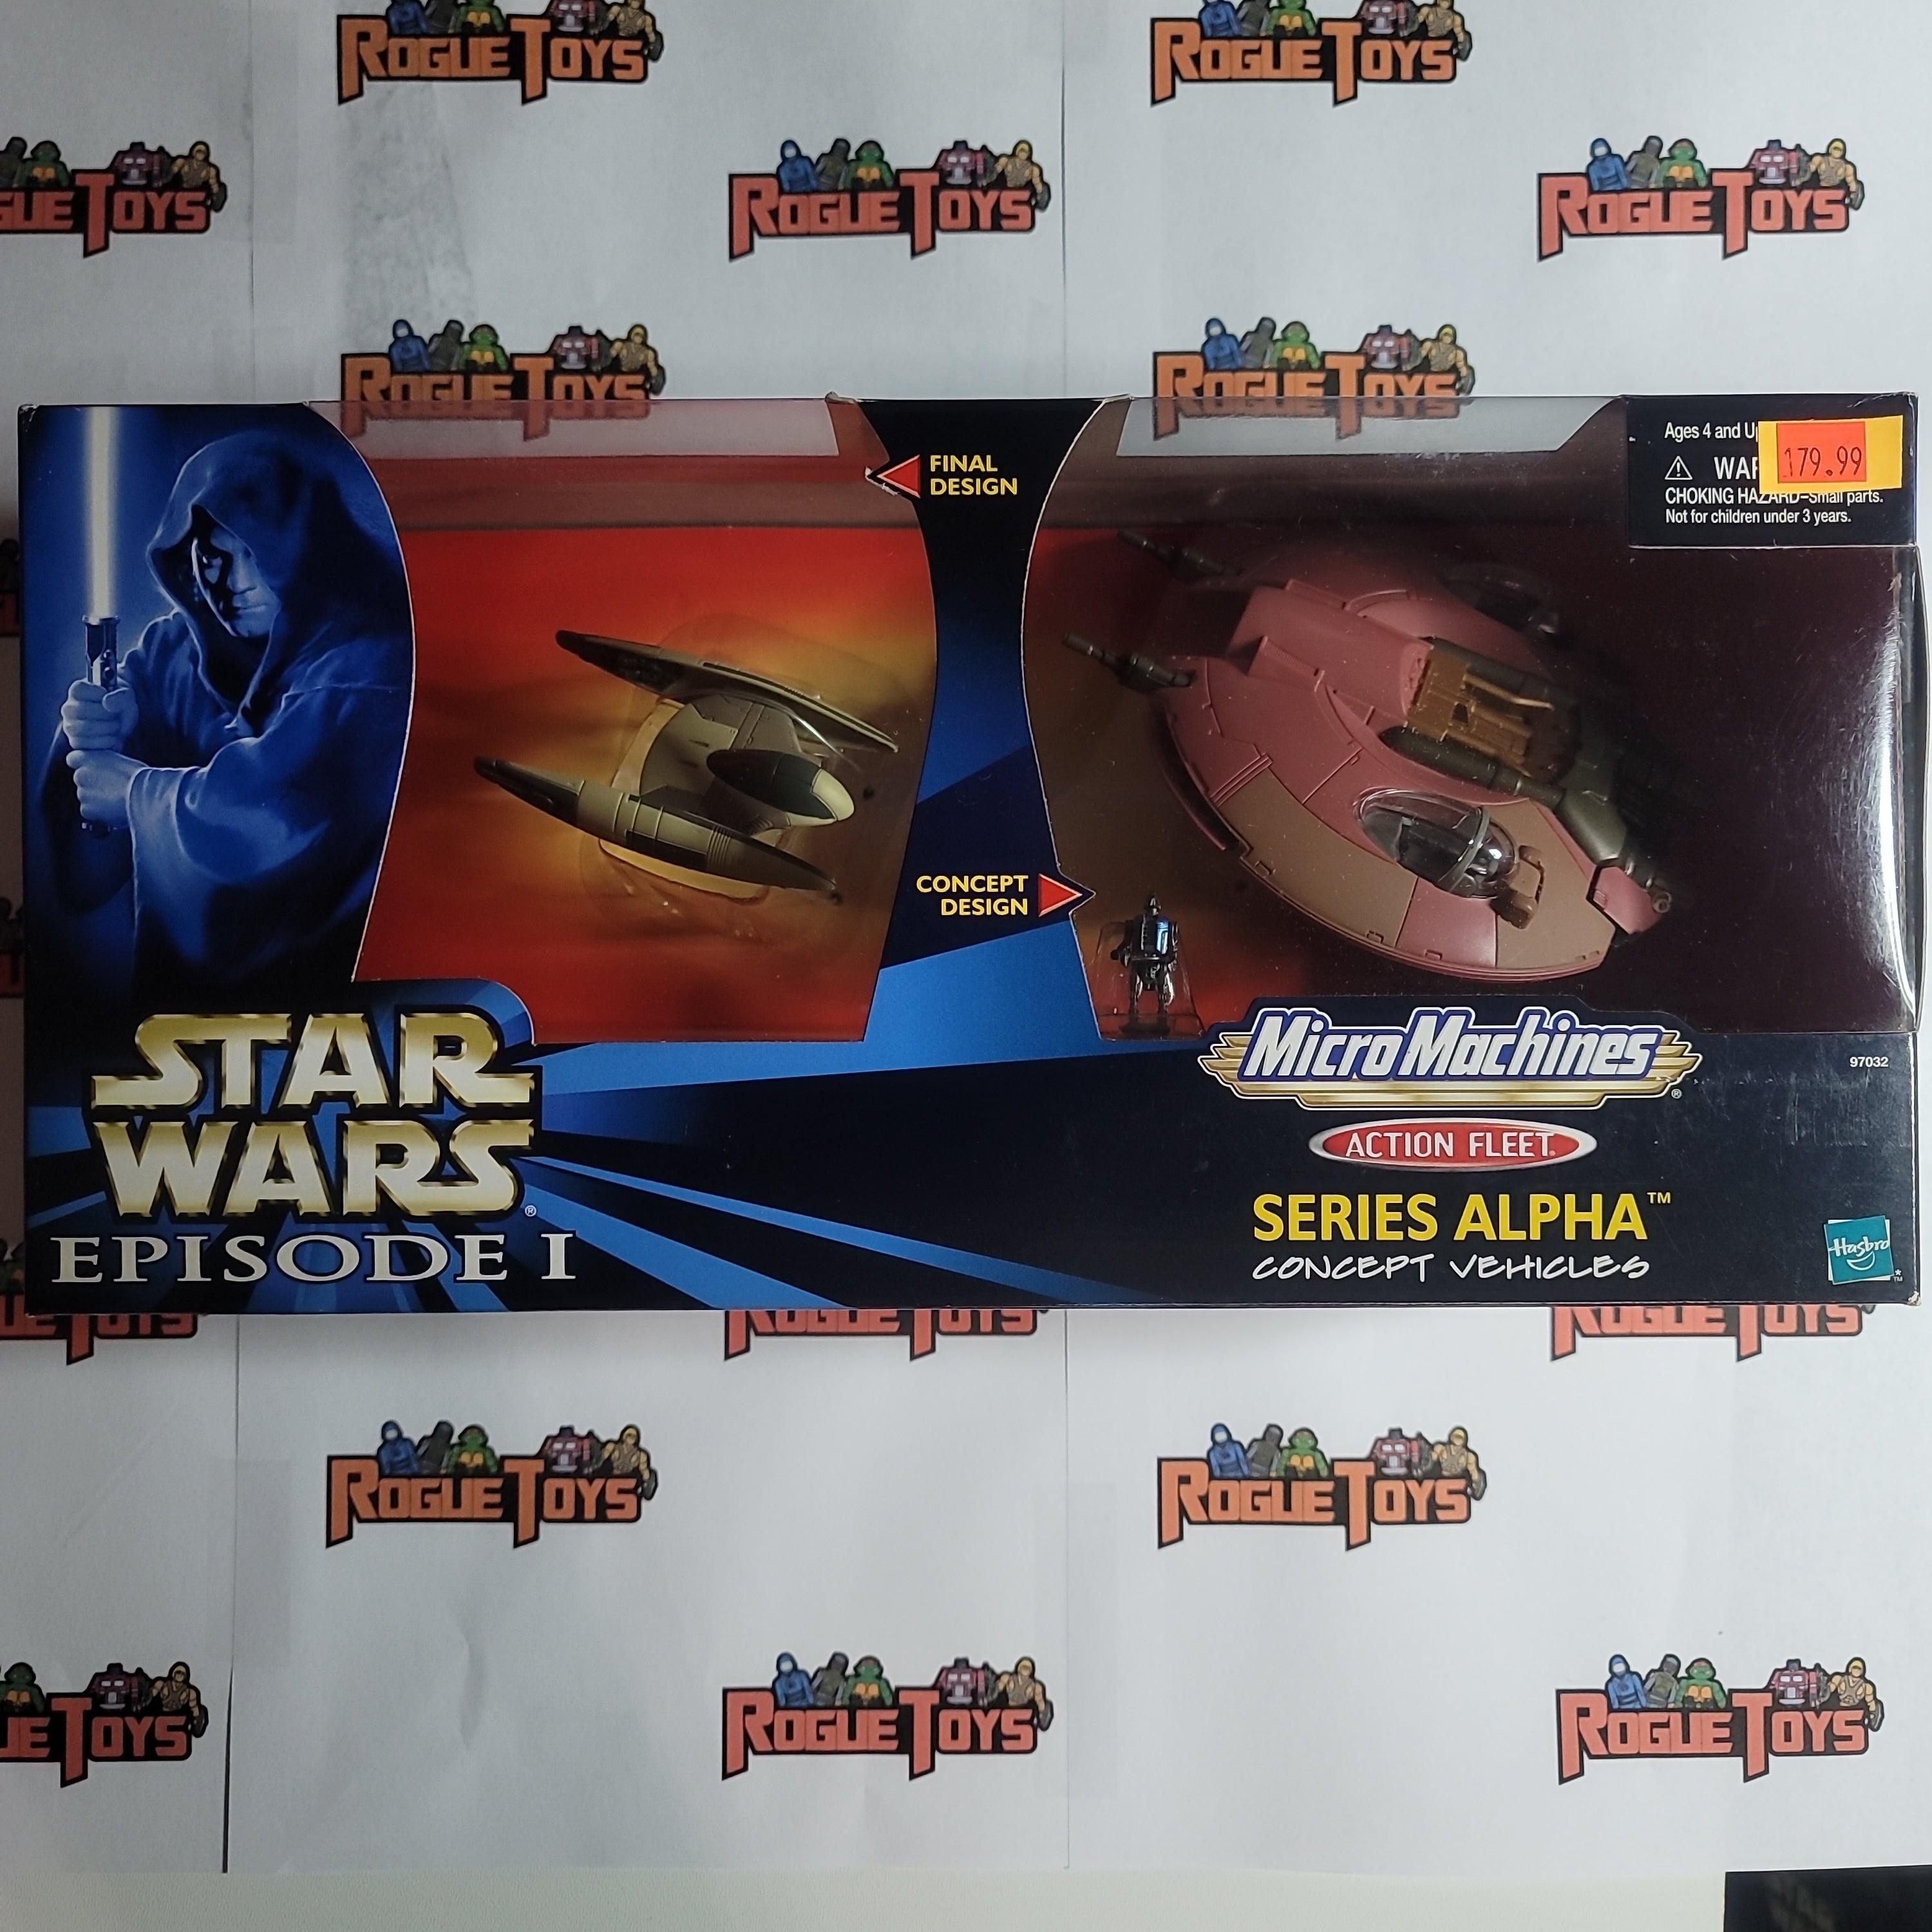 Hasbro Star Wars episode 1 series alpha action fleet Micro Machines Trade federation Droid fighter